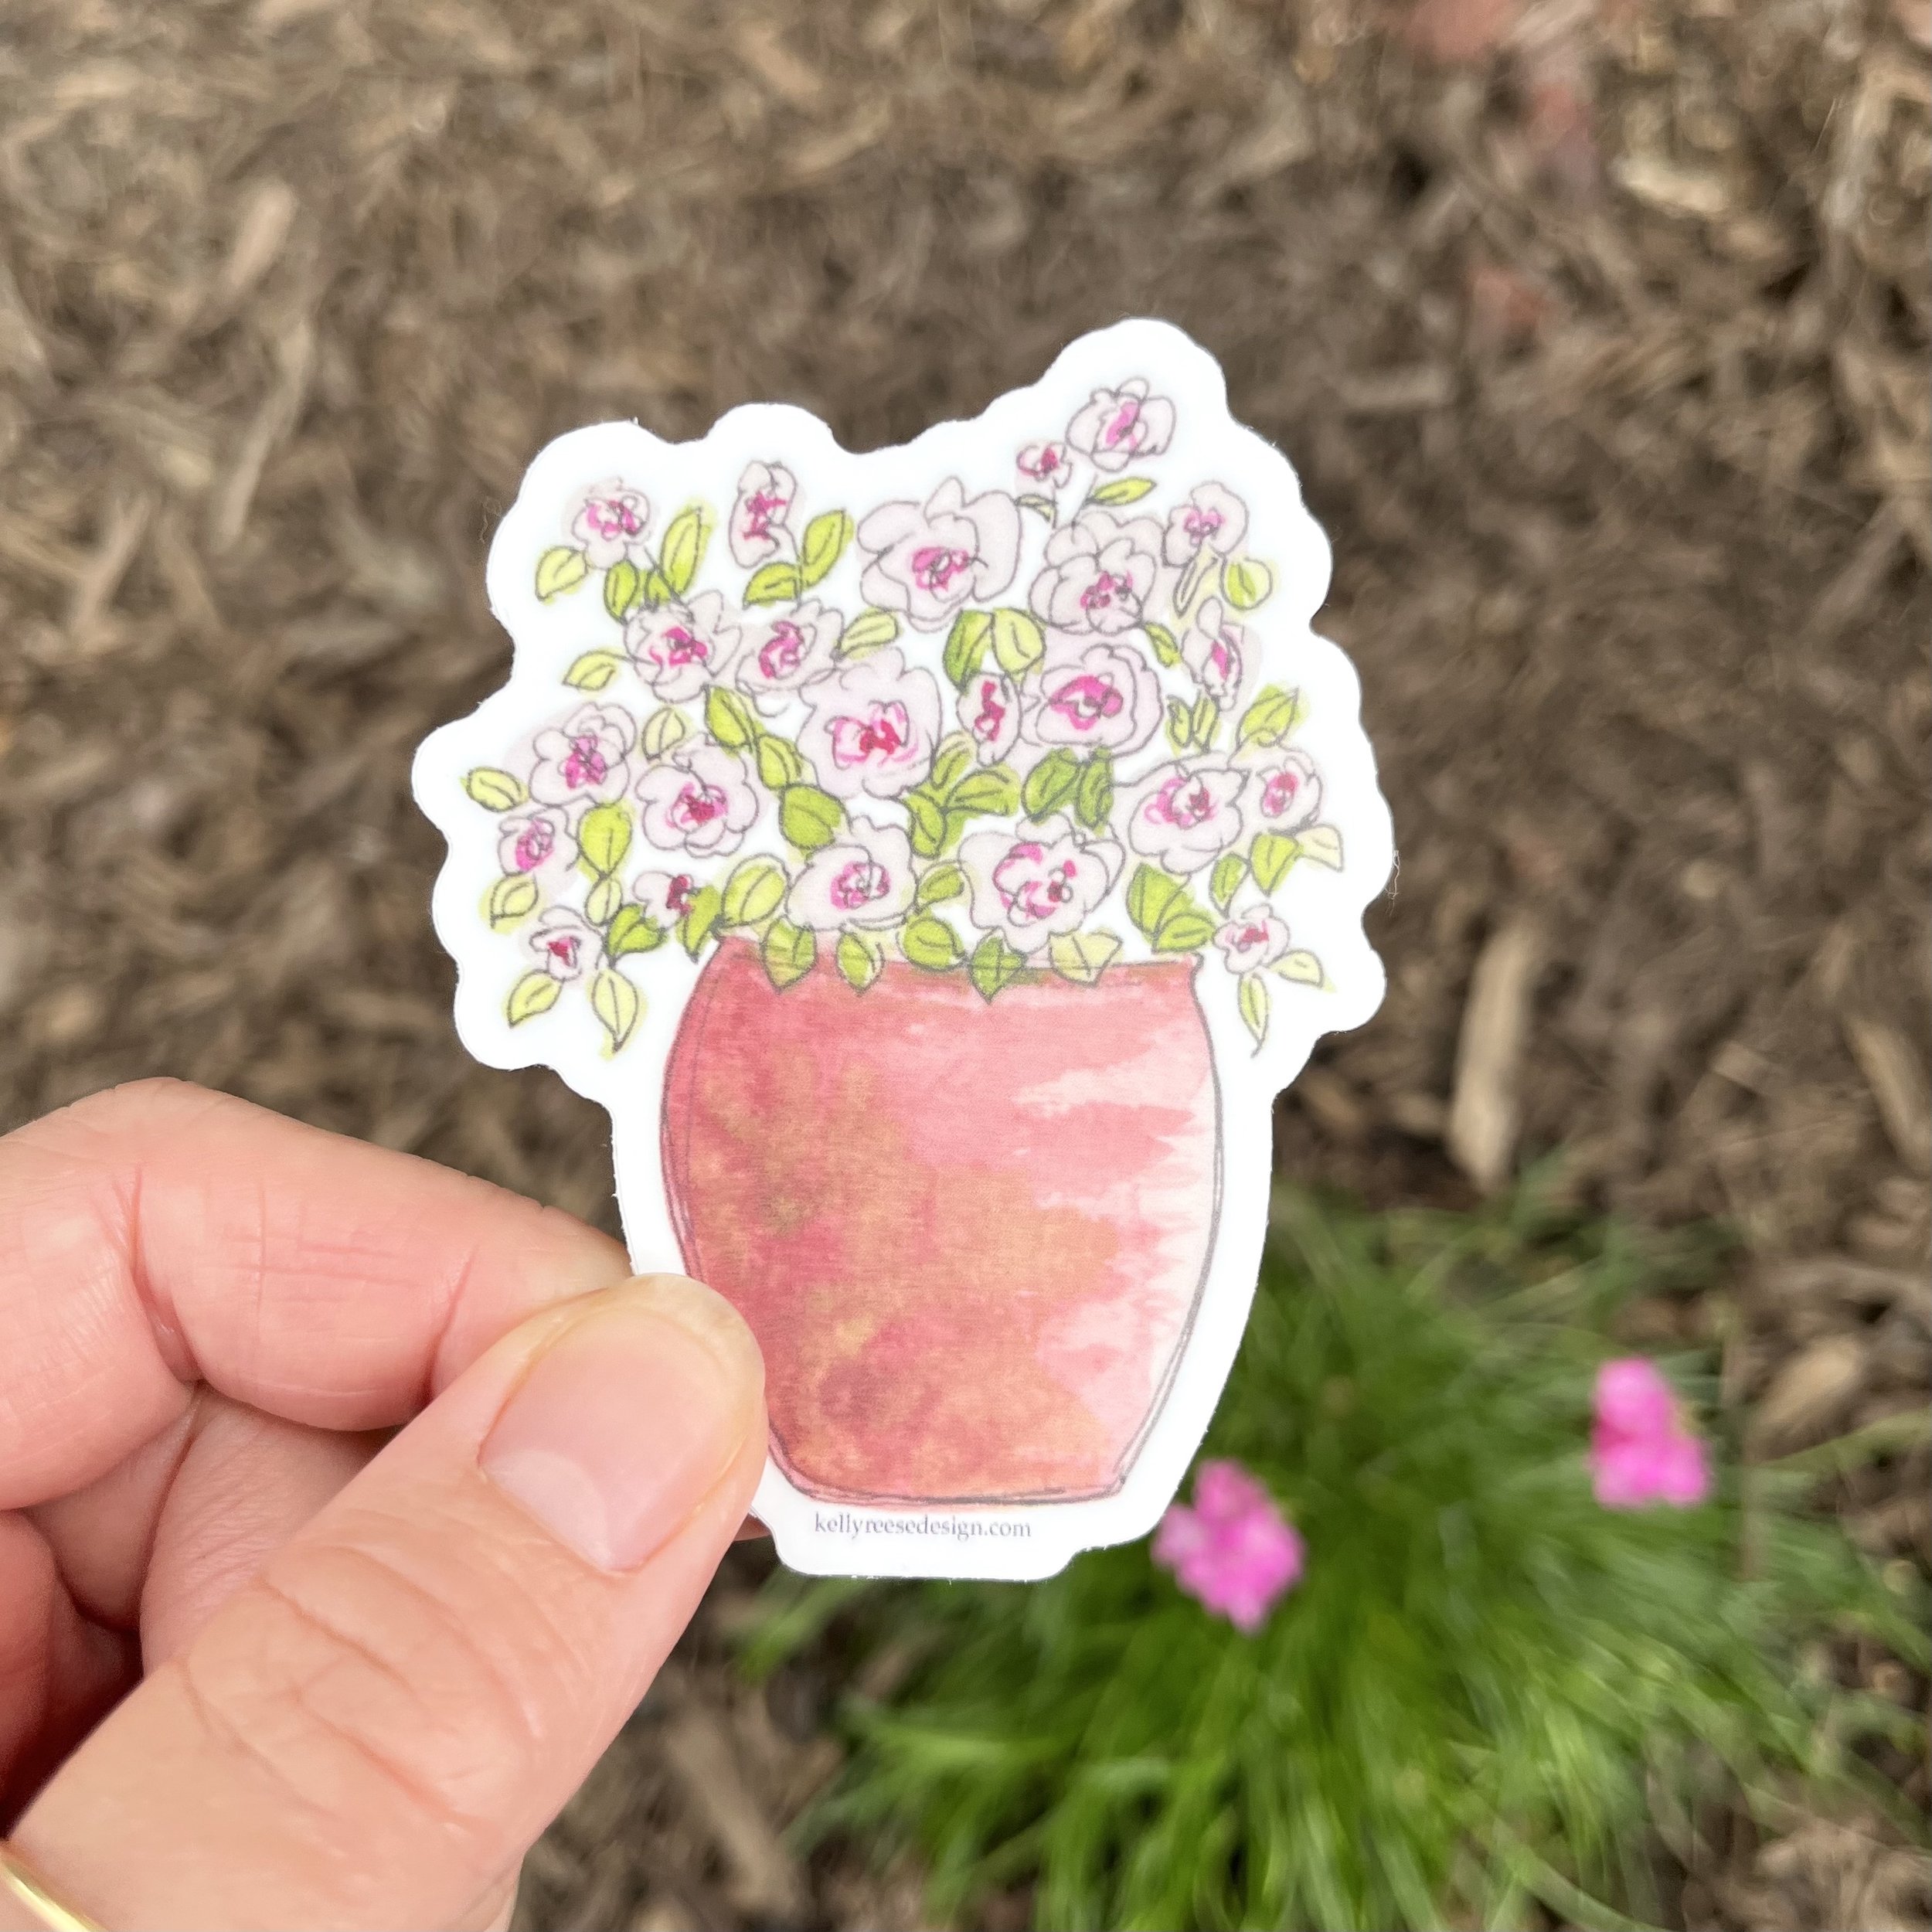 Potted Pink Flowers Sticker - $3.95